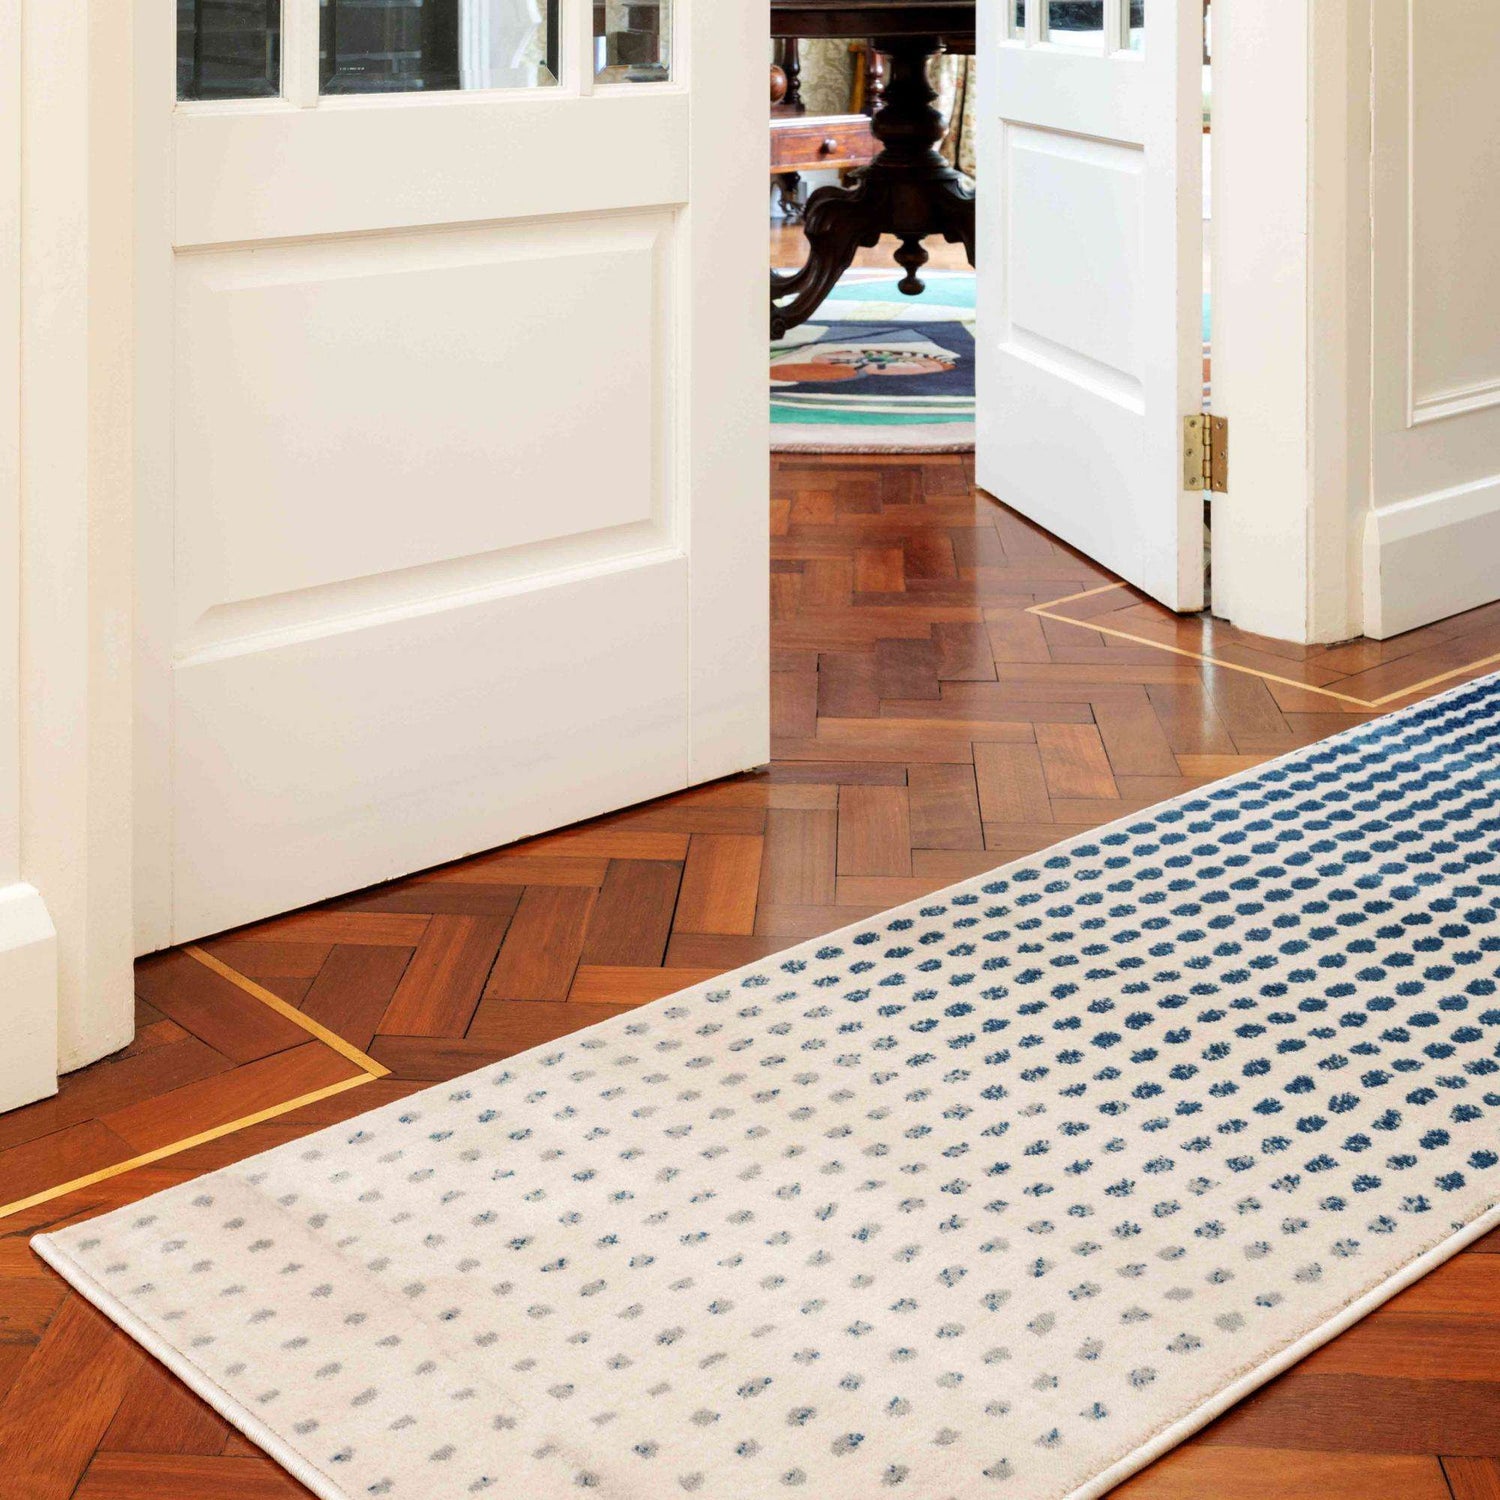 Modern Blue Spotted Ombre Effect Hall Runner Rug